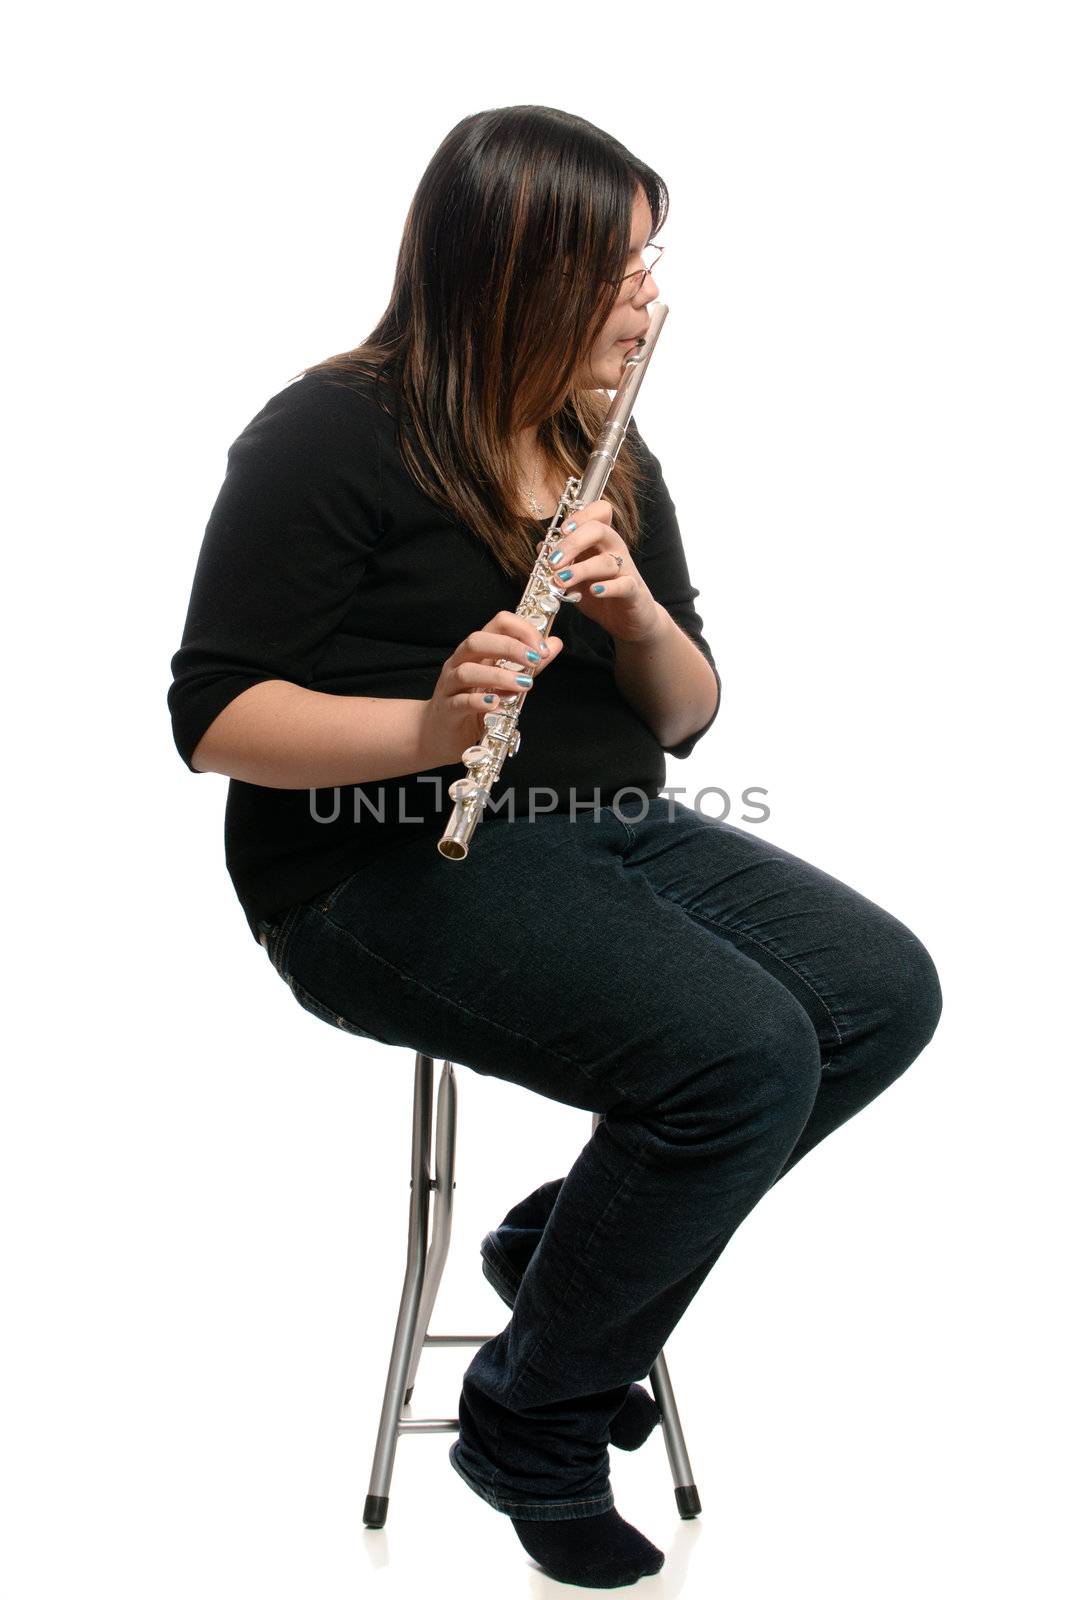 A teenage girl is sitting on a stool while playing the flute, isolated against a white background.